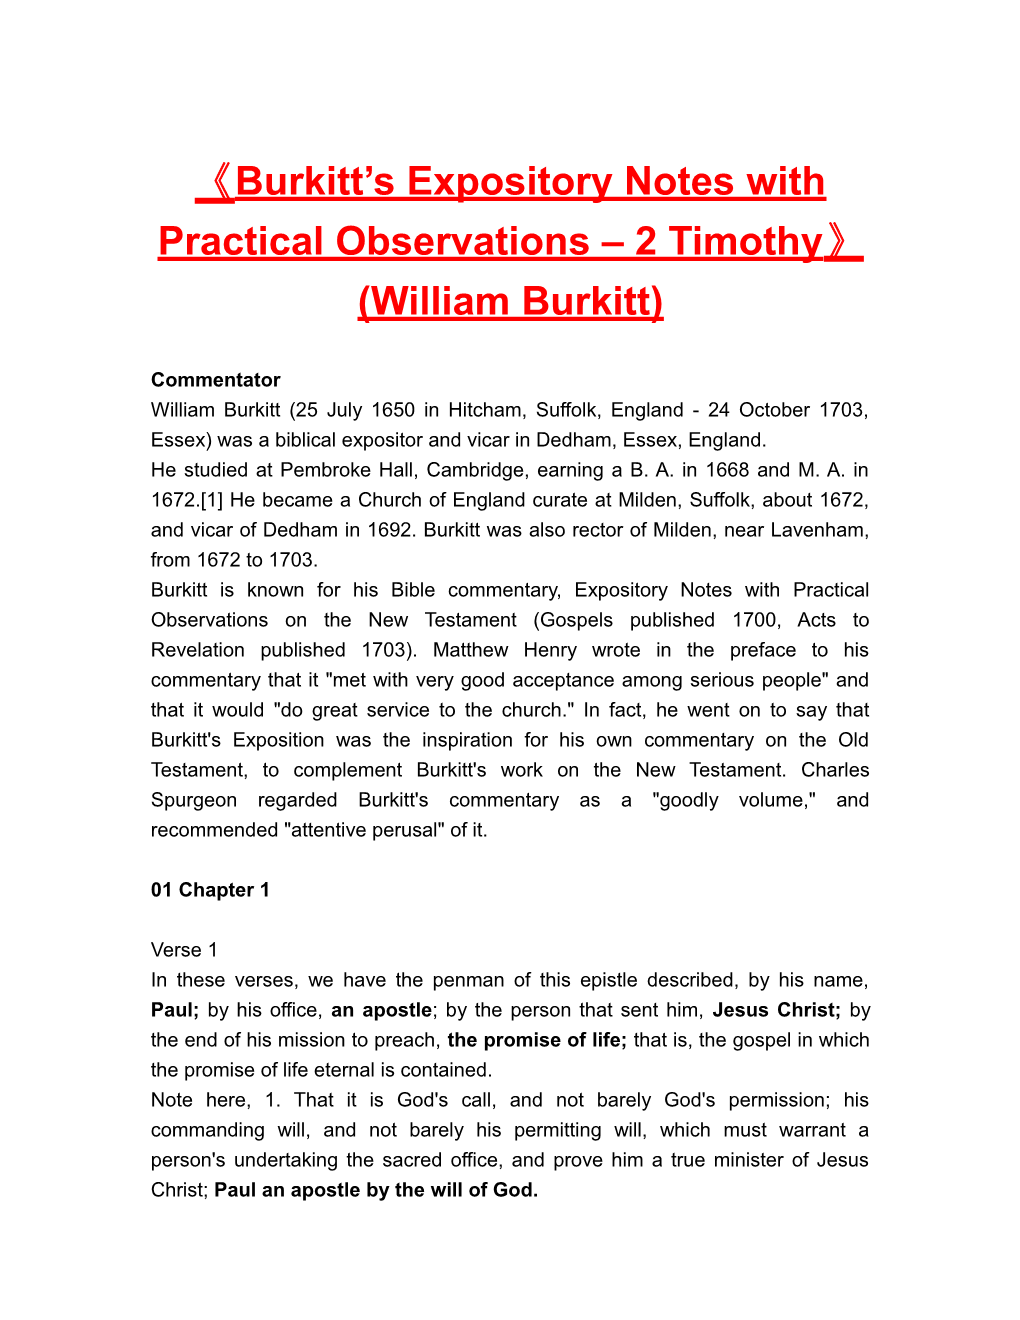 Burkitt S Expository Notes with Practical Observations 2 Timothy (William Burkitt)